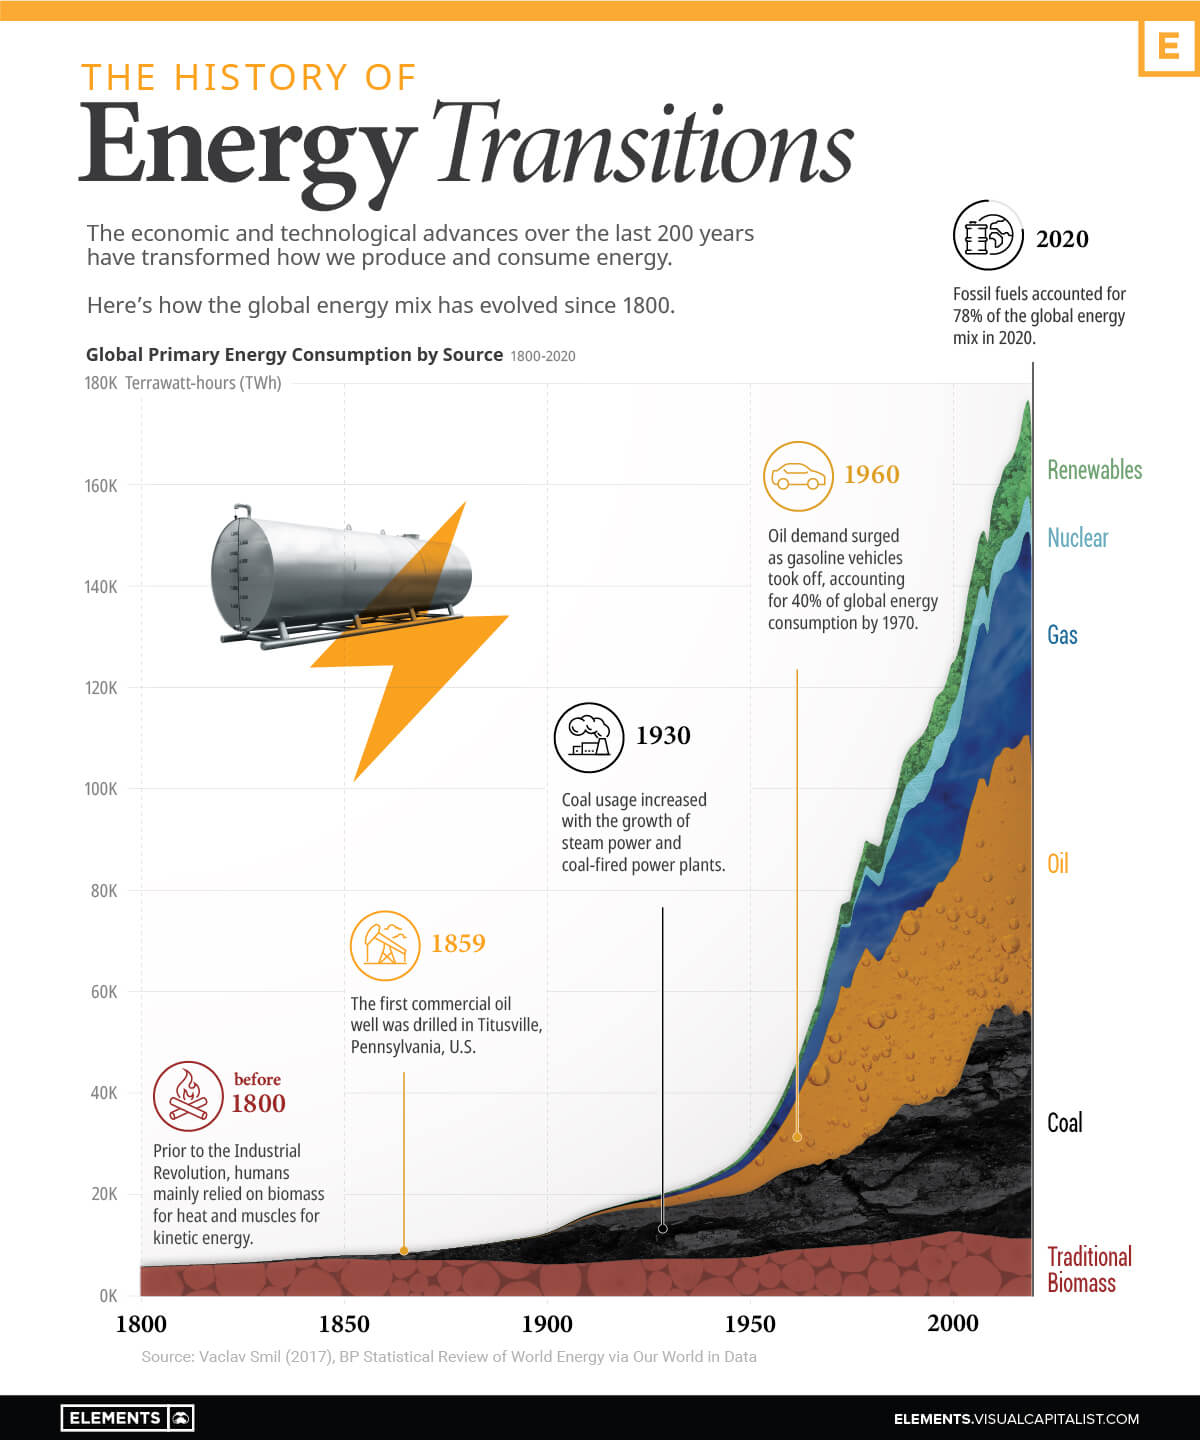 energy transitions